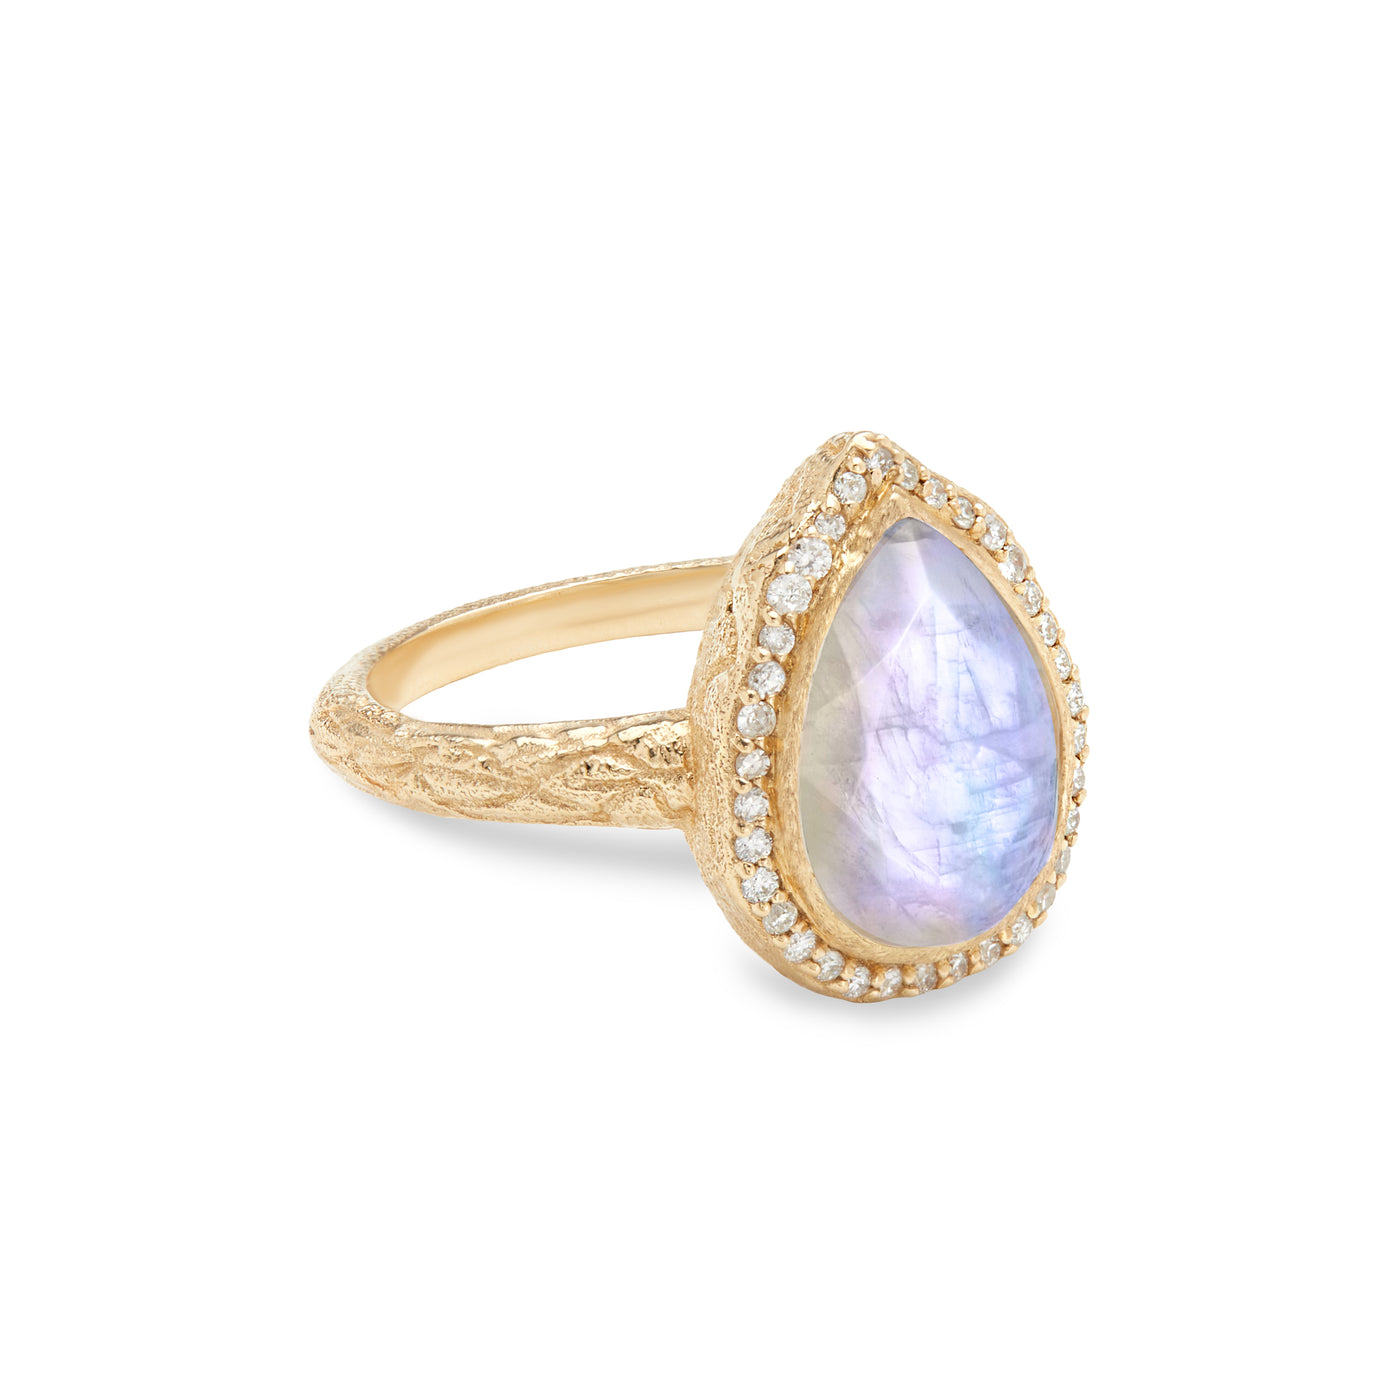 14 Karat Yellow Gold Ring with Pear Shaped Moonstone Stone with Halo of White Diamonds Against White Background Turned for Side View